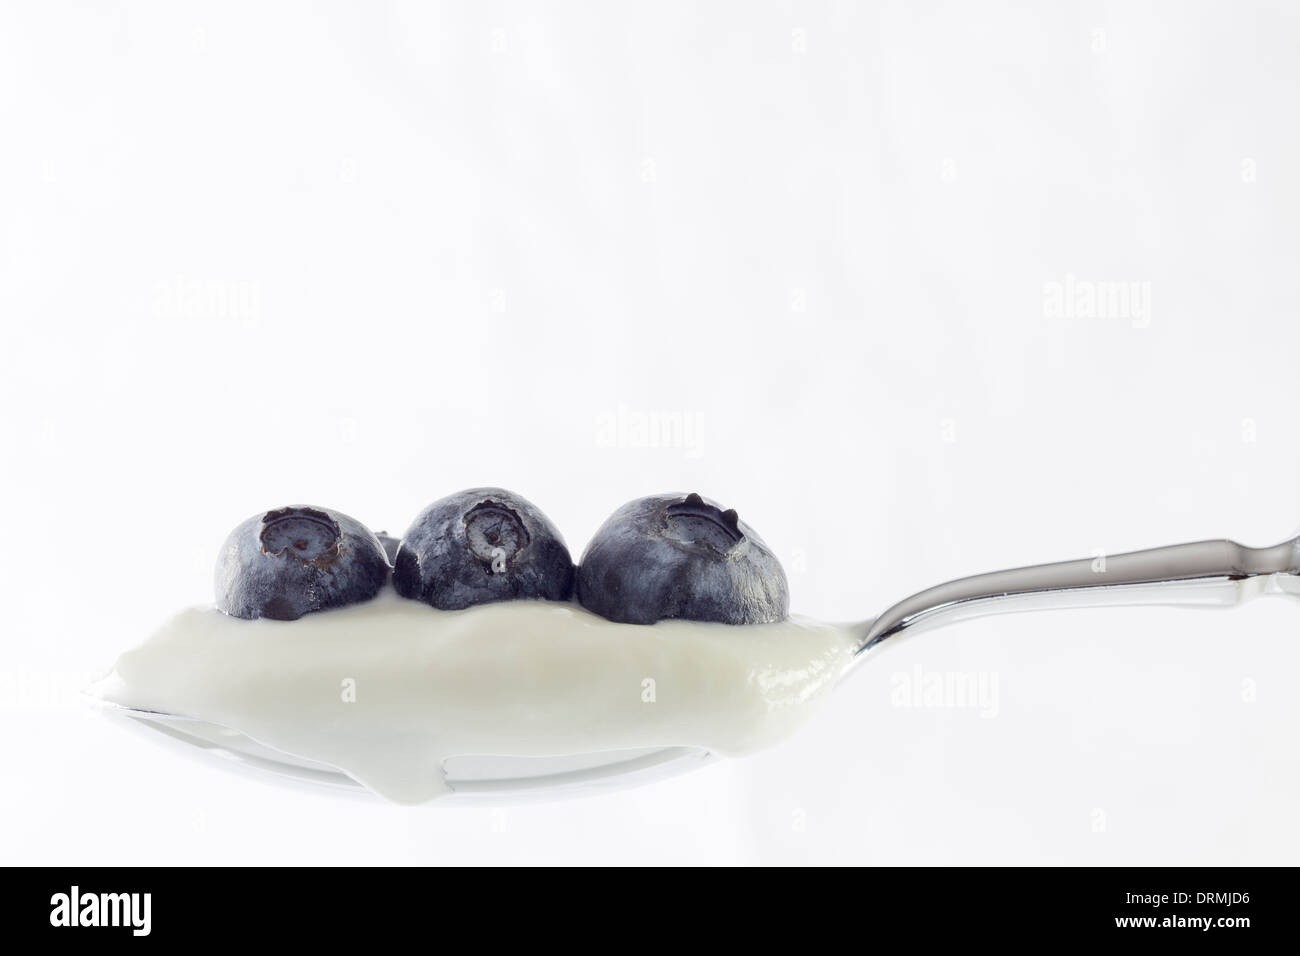 Spoon full of yoghurt with blueberries Stock Photo